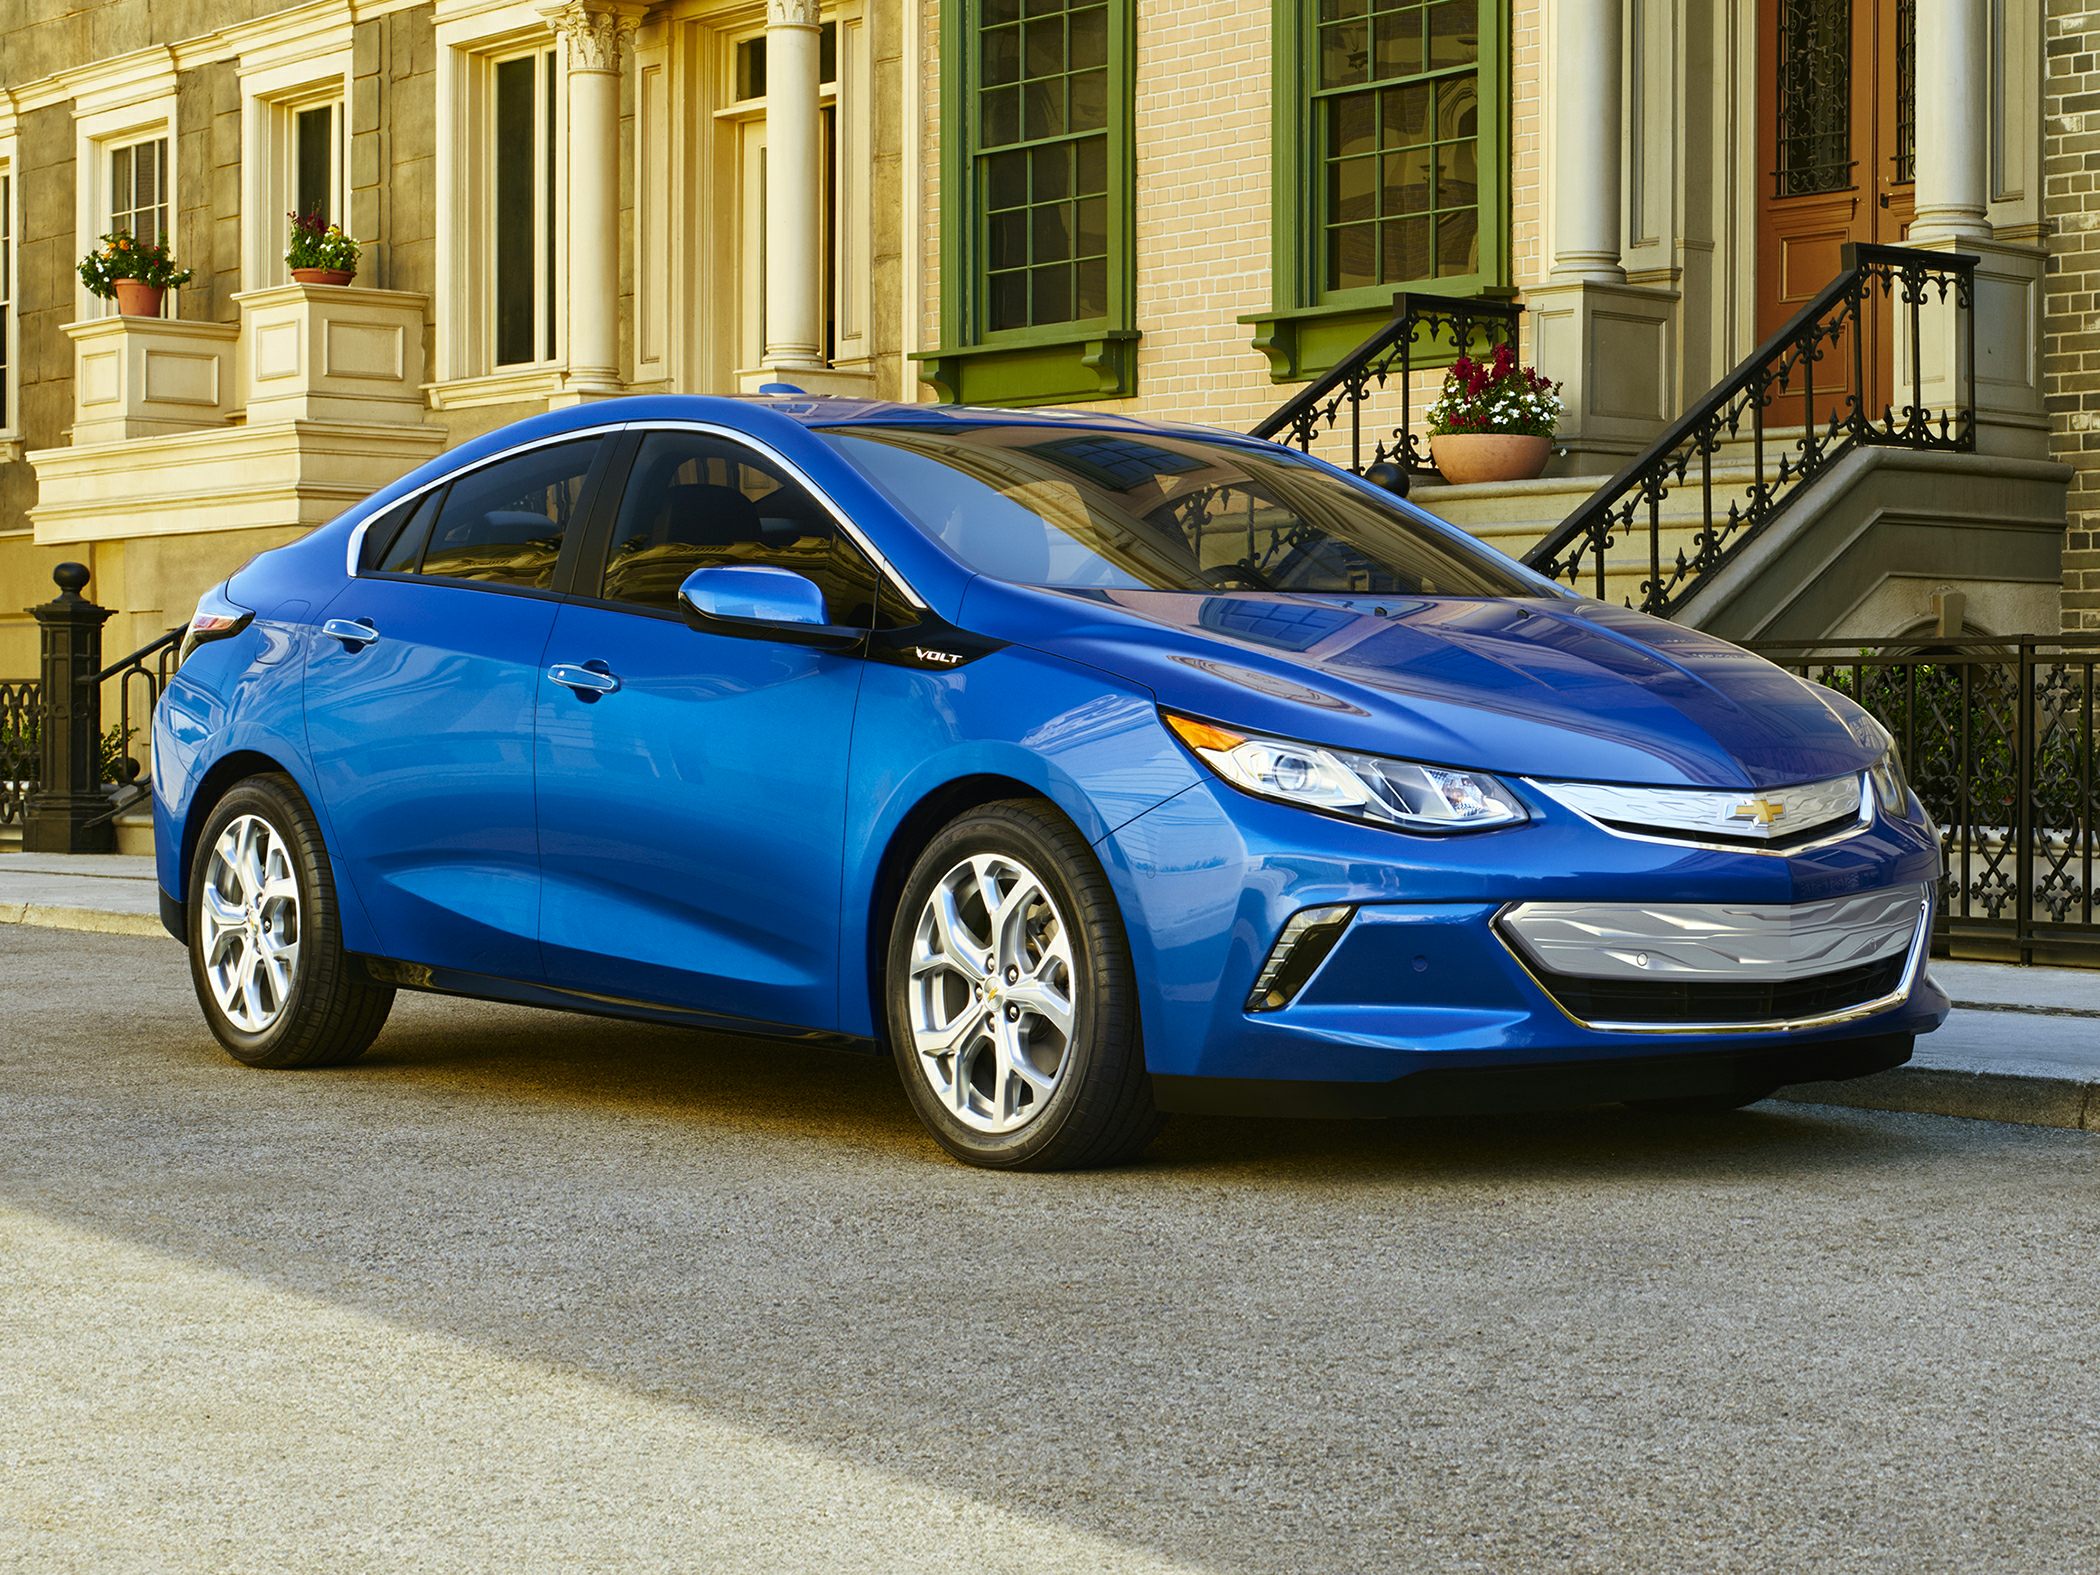 2018 Chevrolet Volt Specs, Prices, Ratings, and Reviews